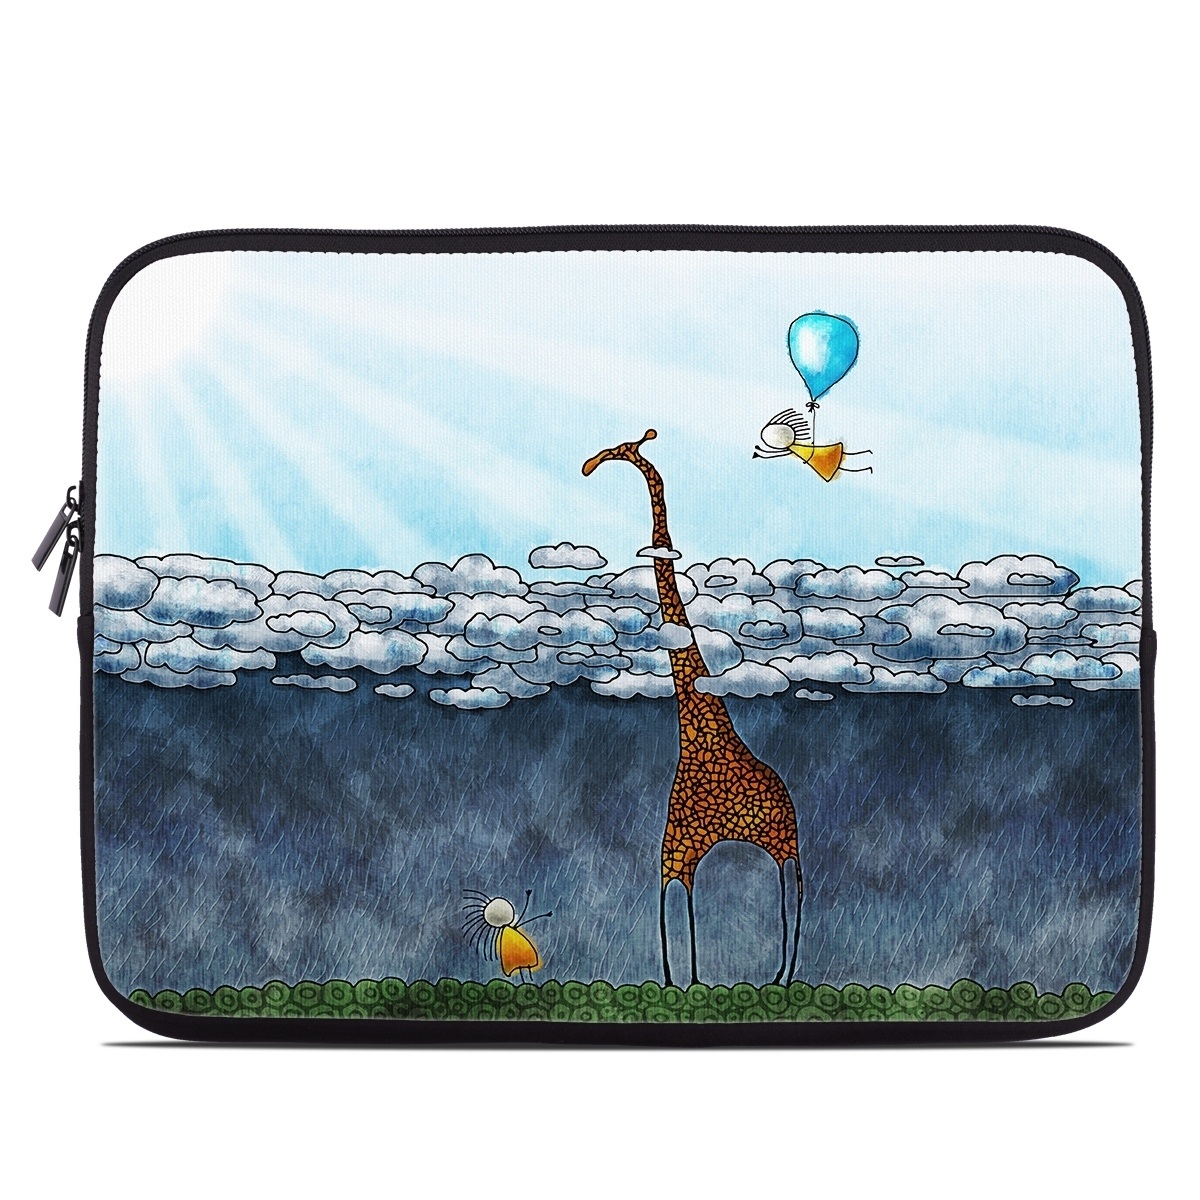 Laptop Sleeve - Above The Clouds (Image 1)